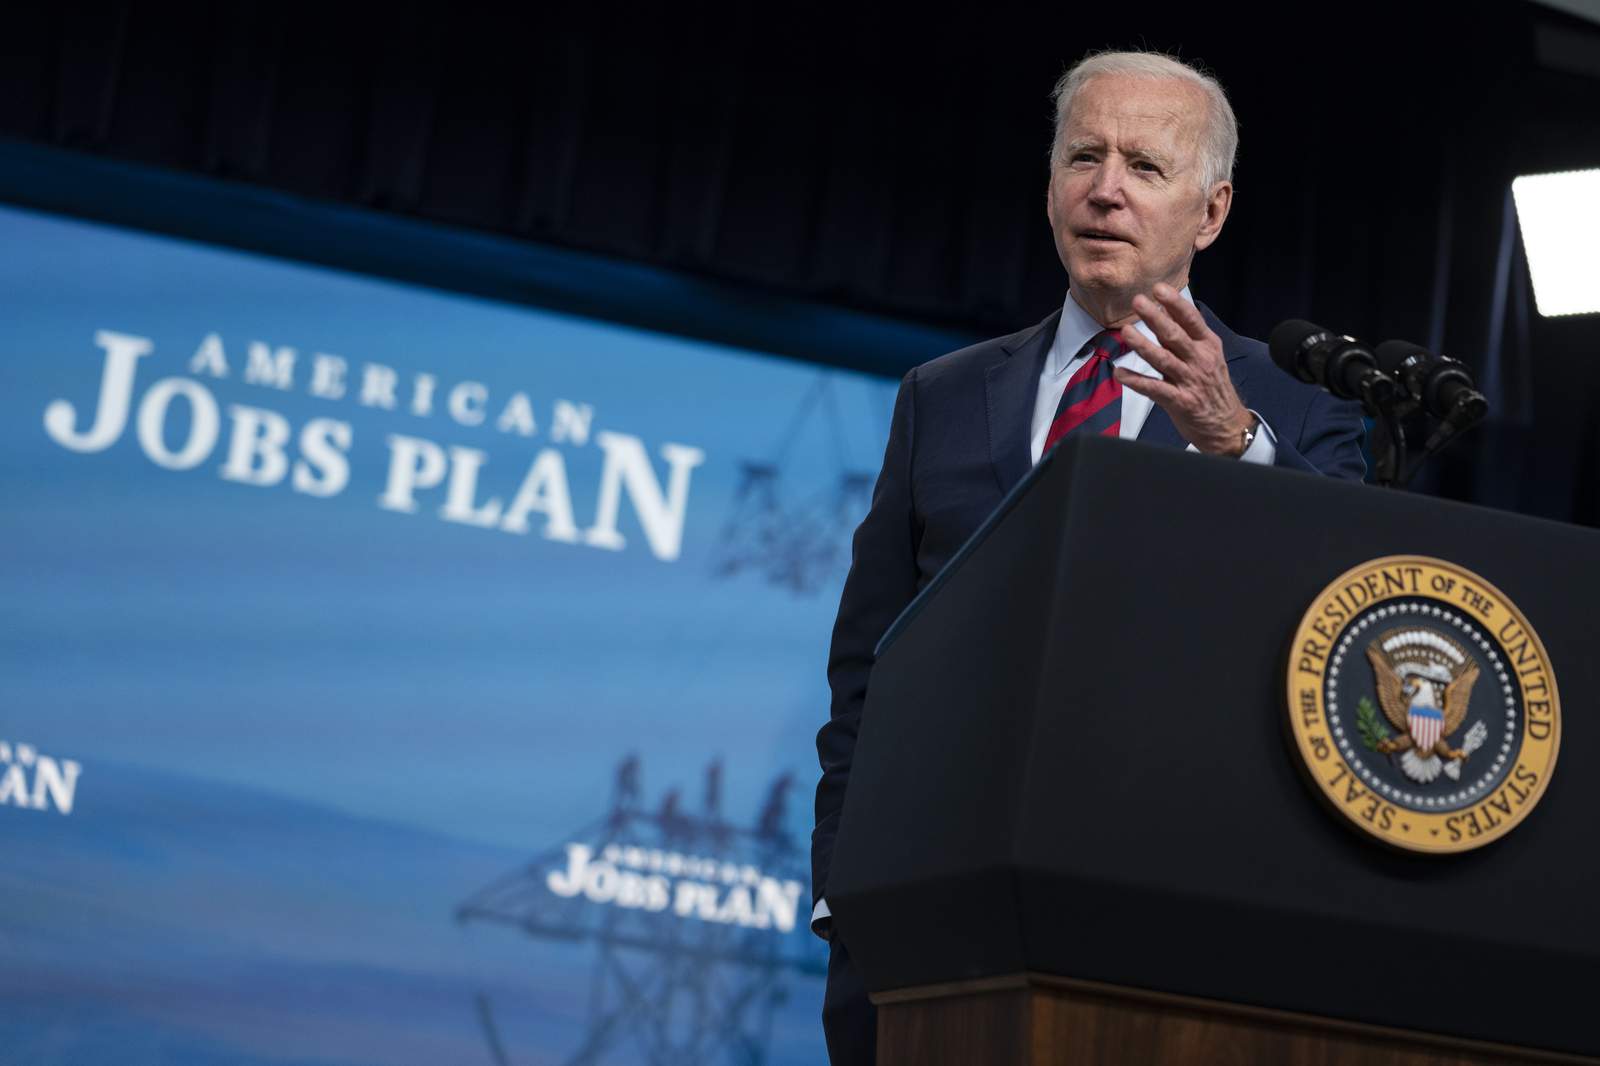 Biden open to compromise on infrastructure, but not inaction